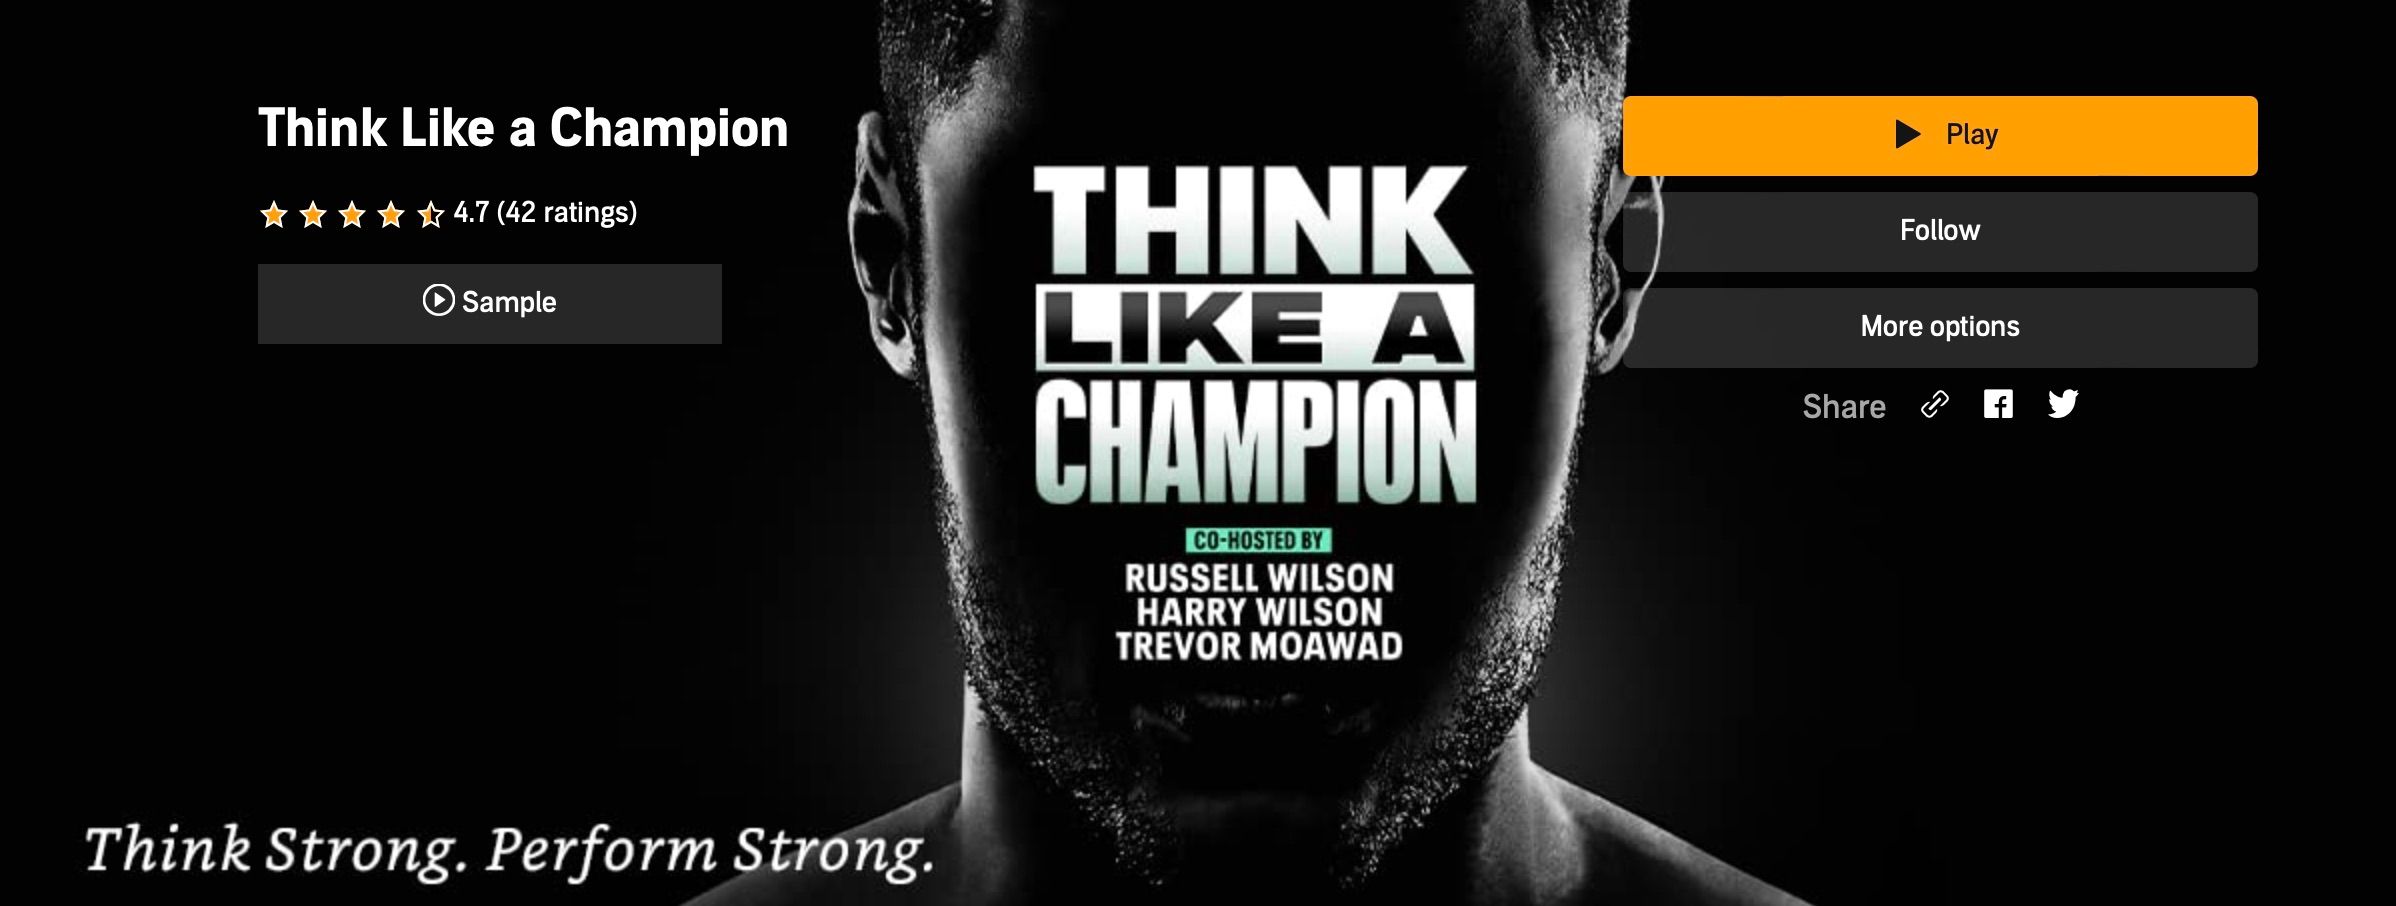 Screenshot showing Think Like a Champion audio series from Audible